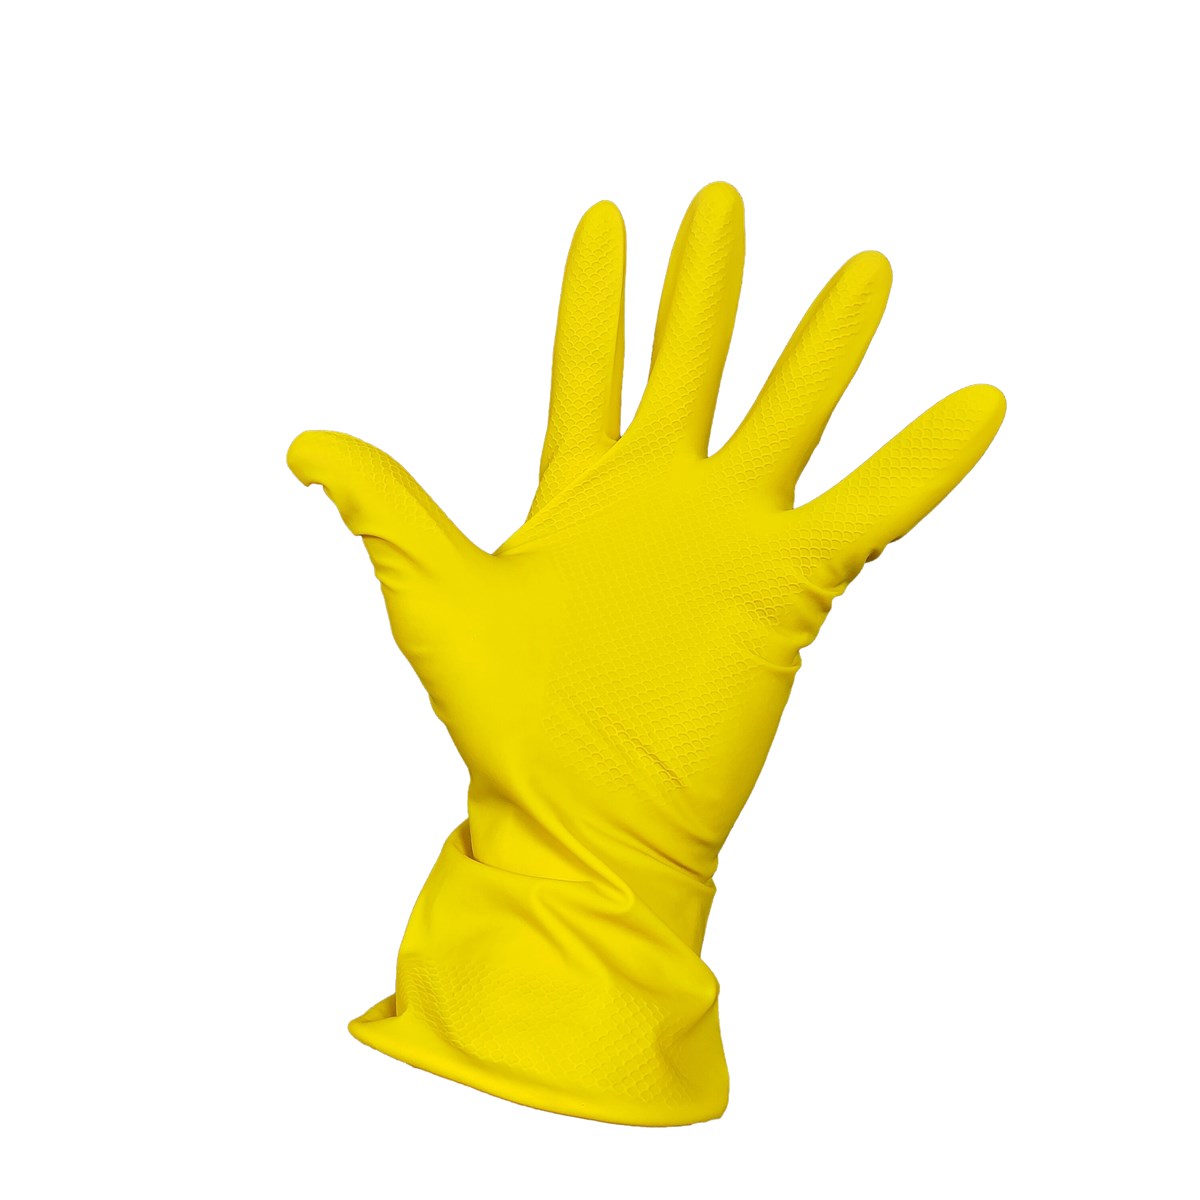 high quality household medical examination sterile safety working rubber latex gloves